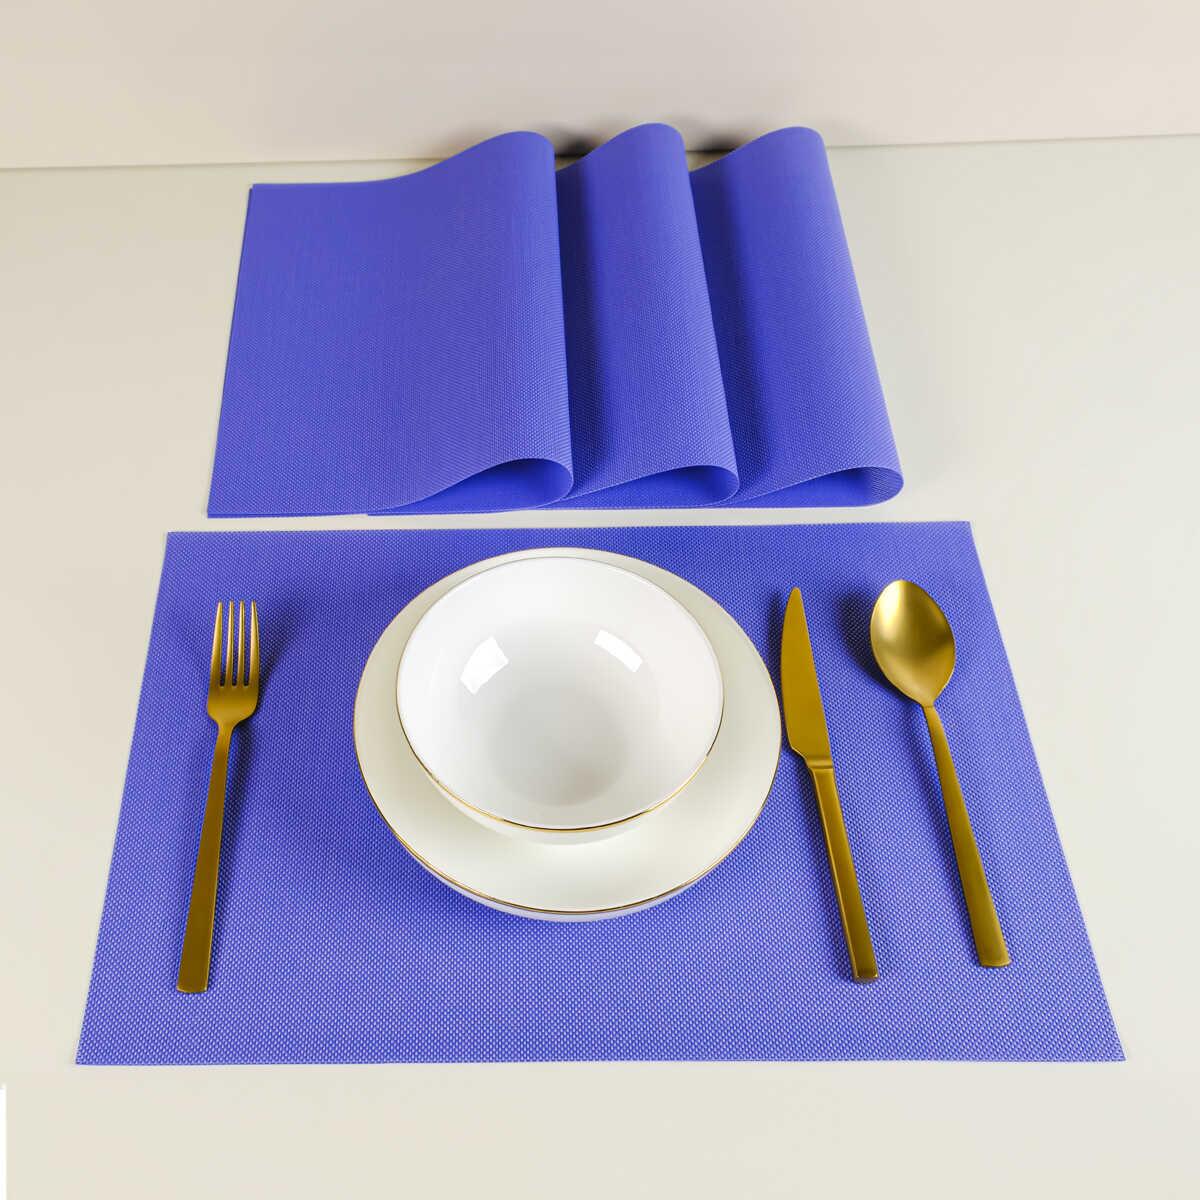 Maxstyle Harmony Bluebell 4 Piece Placemat Set 30x45 cm